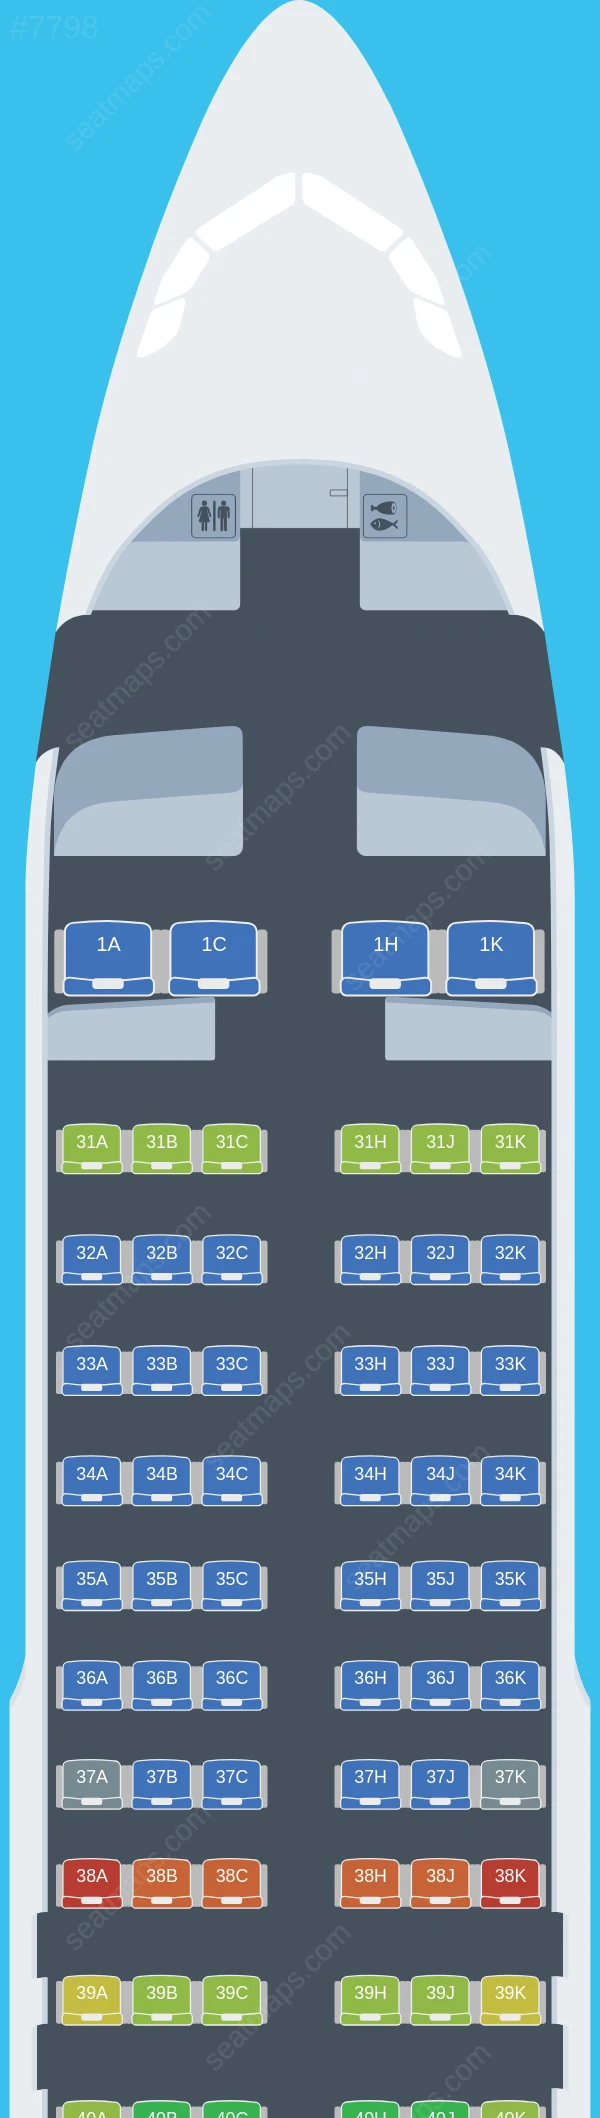 China Southern Airbus A320-200 V.2 seatmap preview